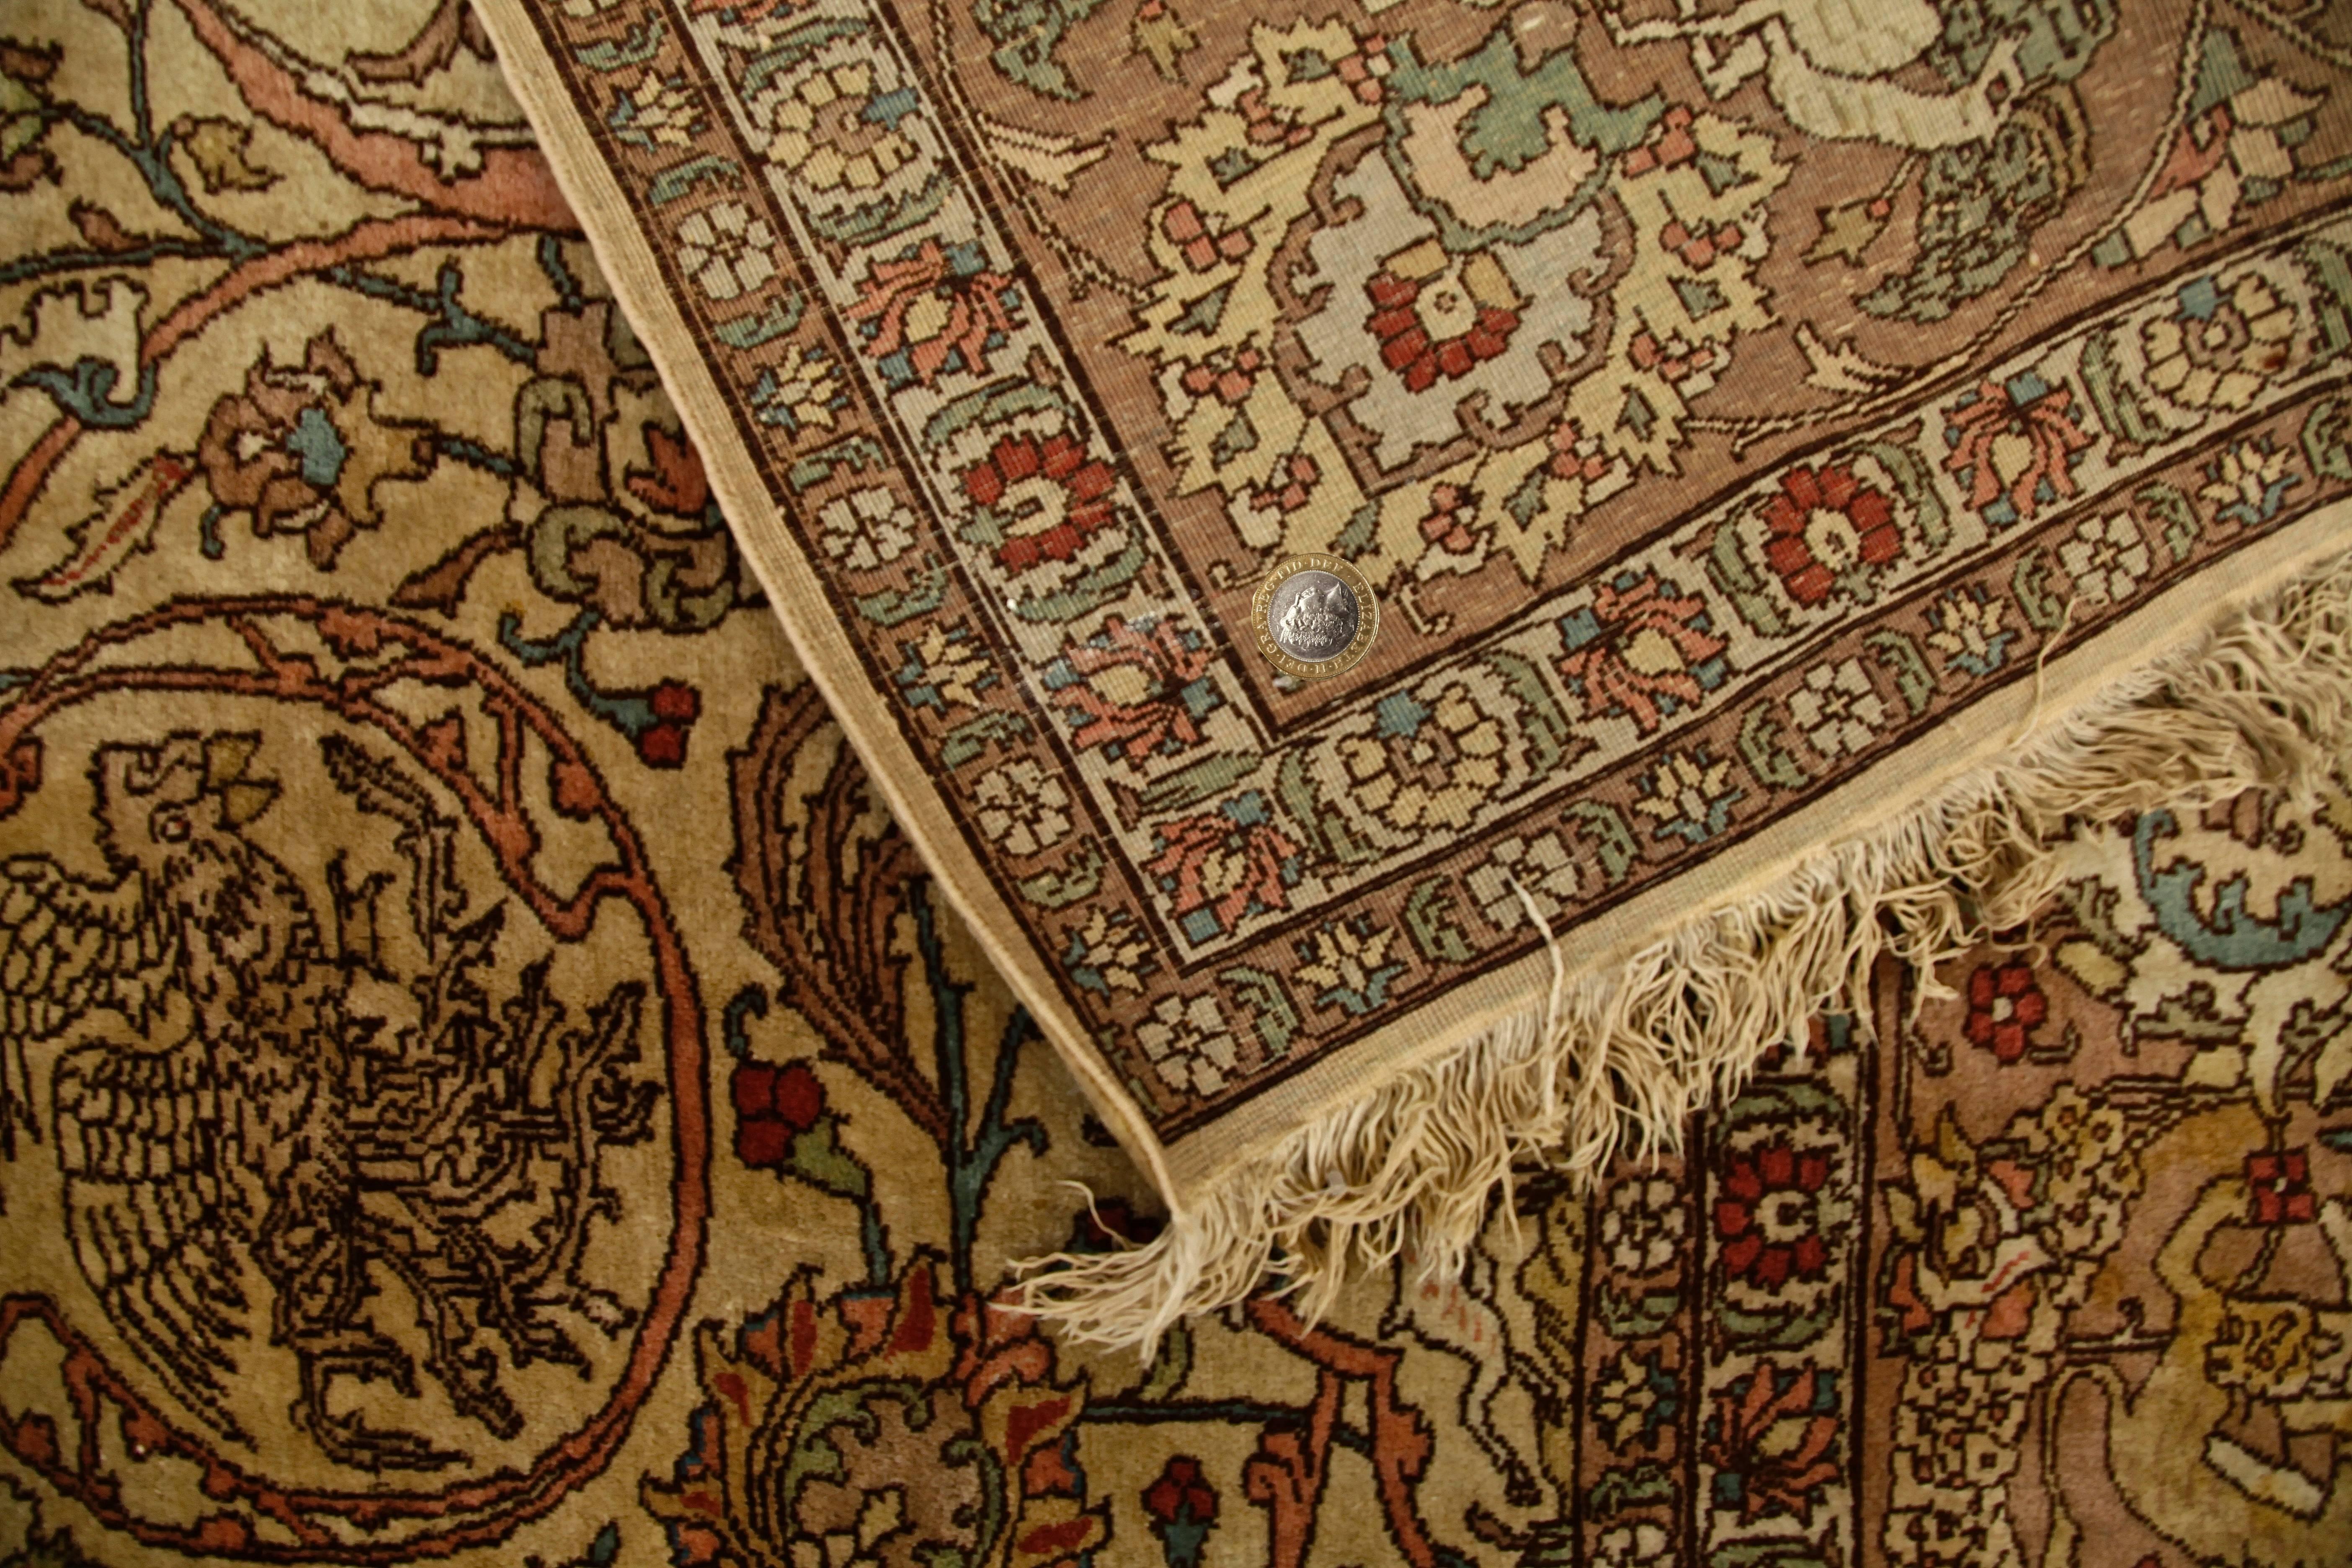 Antique Persian Tabriz carpet, mid-20th century. Measures: 298 x 393cm.

Tabriz carpet as they lead the viewer's eye on a seemingly never-ending journey along every twist and turn, earthy brown, steel grey in the surrounding borders. Delicate